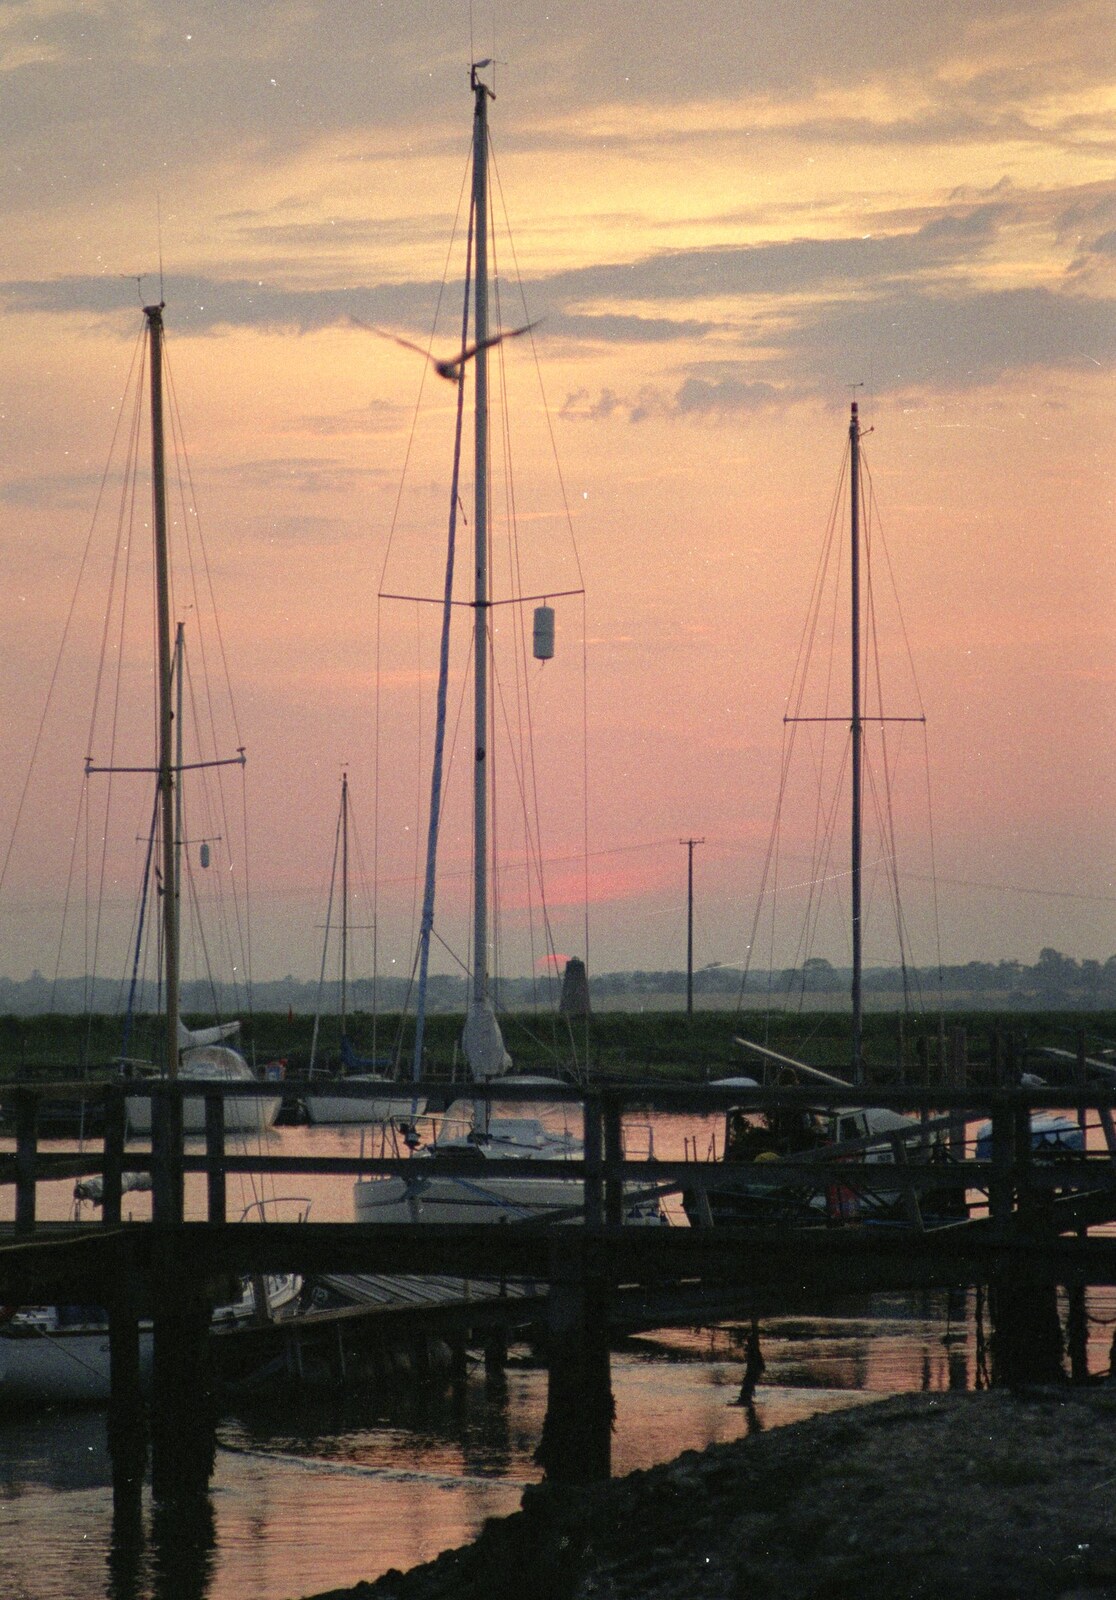 Boats on the river Blyth at sunset, Southwold  from The Diss Raft Race, Diss Mere, Norfolk - 6th July 1991